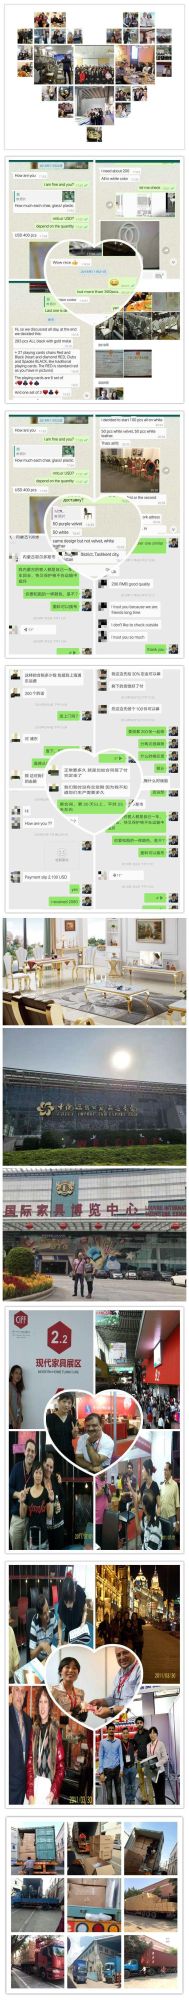 Hot Sale 1200 Glass/ Marble Round LED Light Party Dining Wedding Furniture Stainless Steel 1+6dining Table